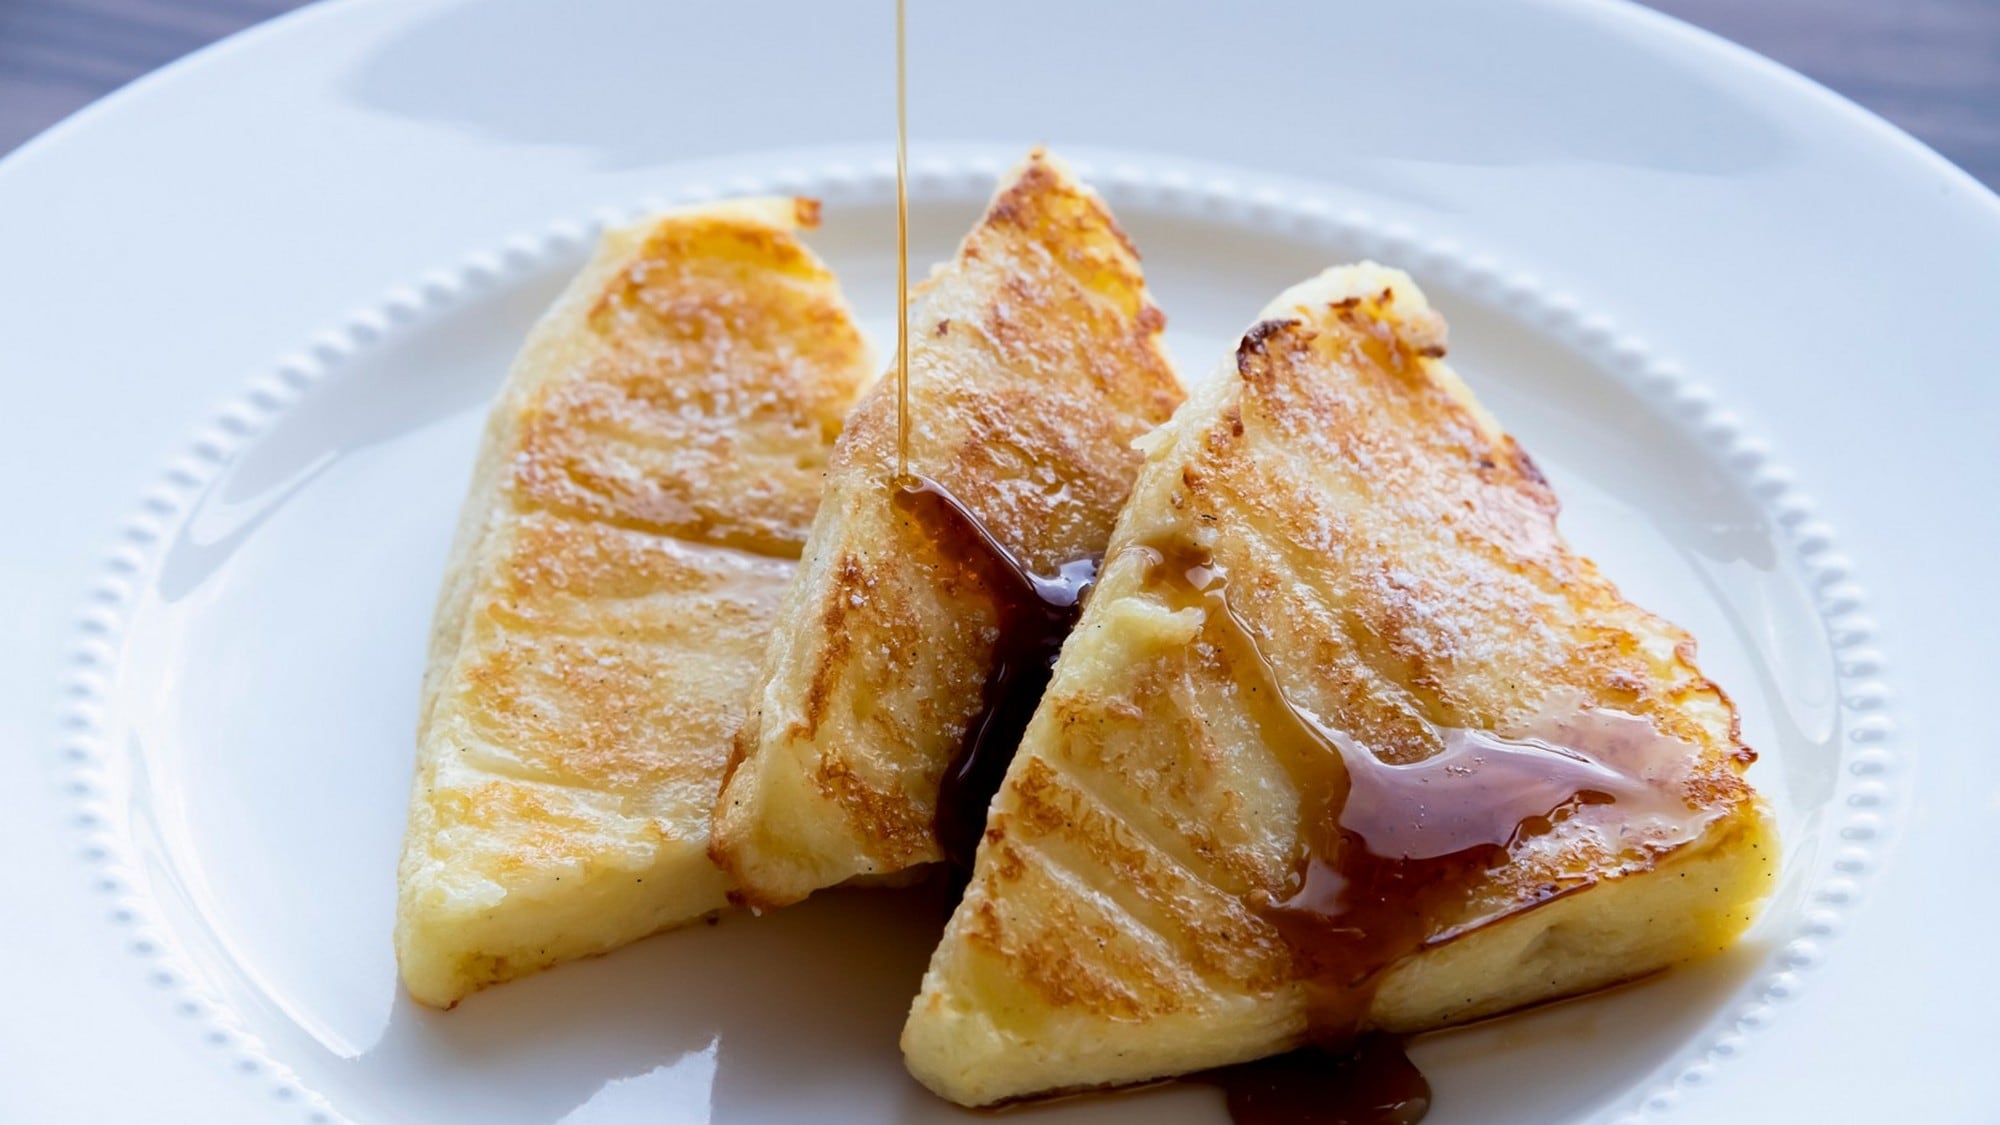 An excellent French toast for breakfast. It will be baked on the spot.